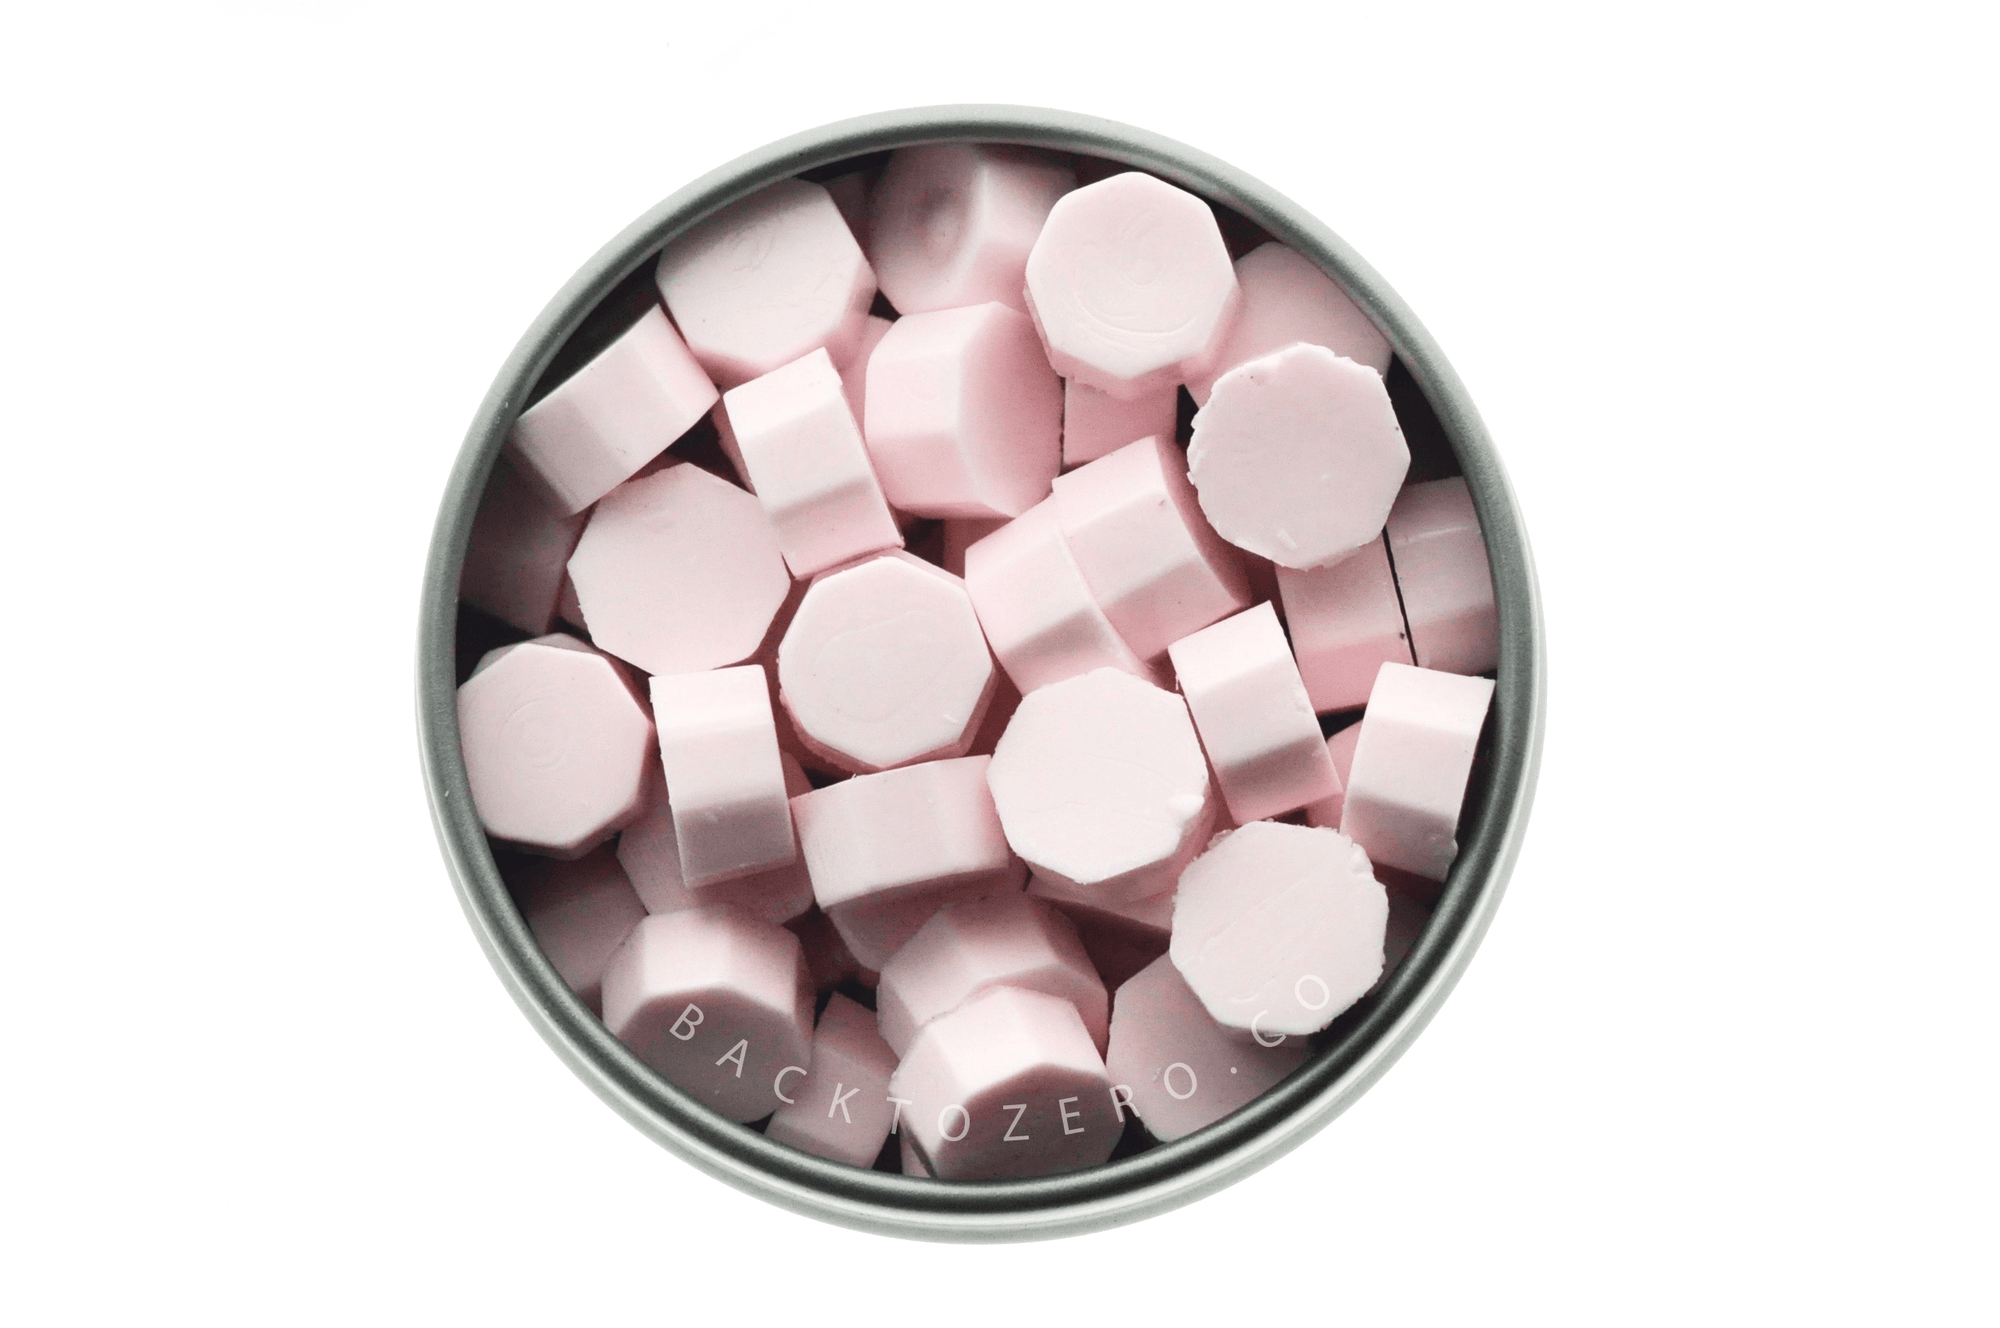 Cotton Candy Octagon Sealing Wax Beads - Backtozero B20 - cotton candy, dusty pink, octagon bead, Pink, sealing wax, soft pink, tin, Wax Beads